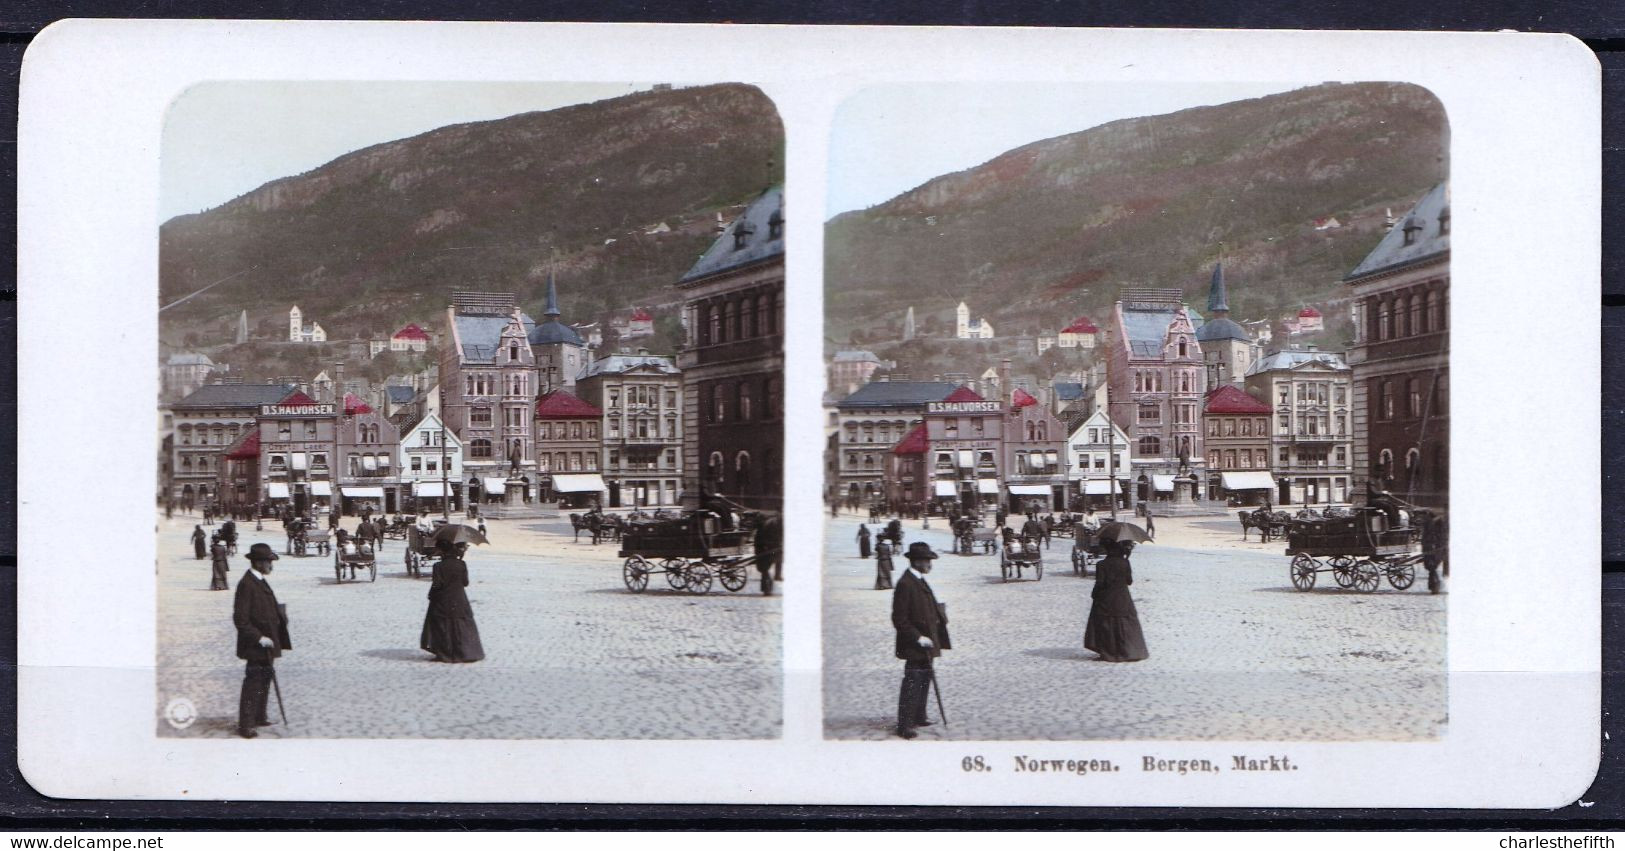 ORIGINAL STEREO PHOTO NORWAY - BERGEN MARKET - FIN 1800 - NICE ANIMATION - RARE !! IN COLOUR - Old (before 1900)